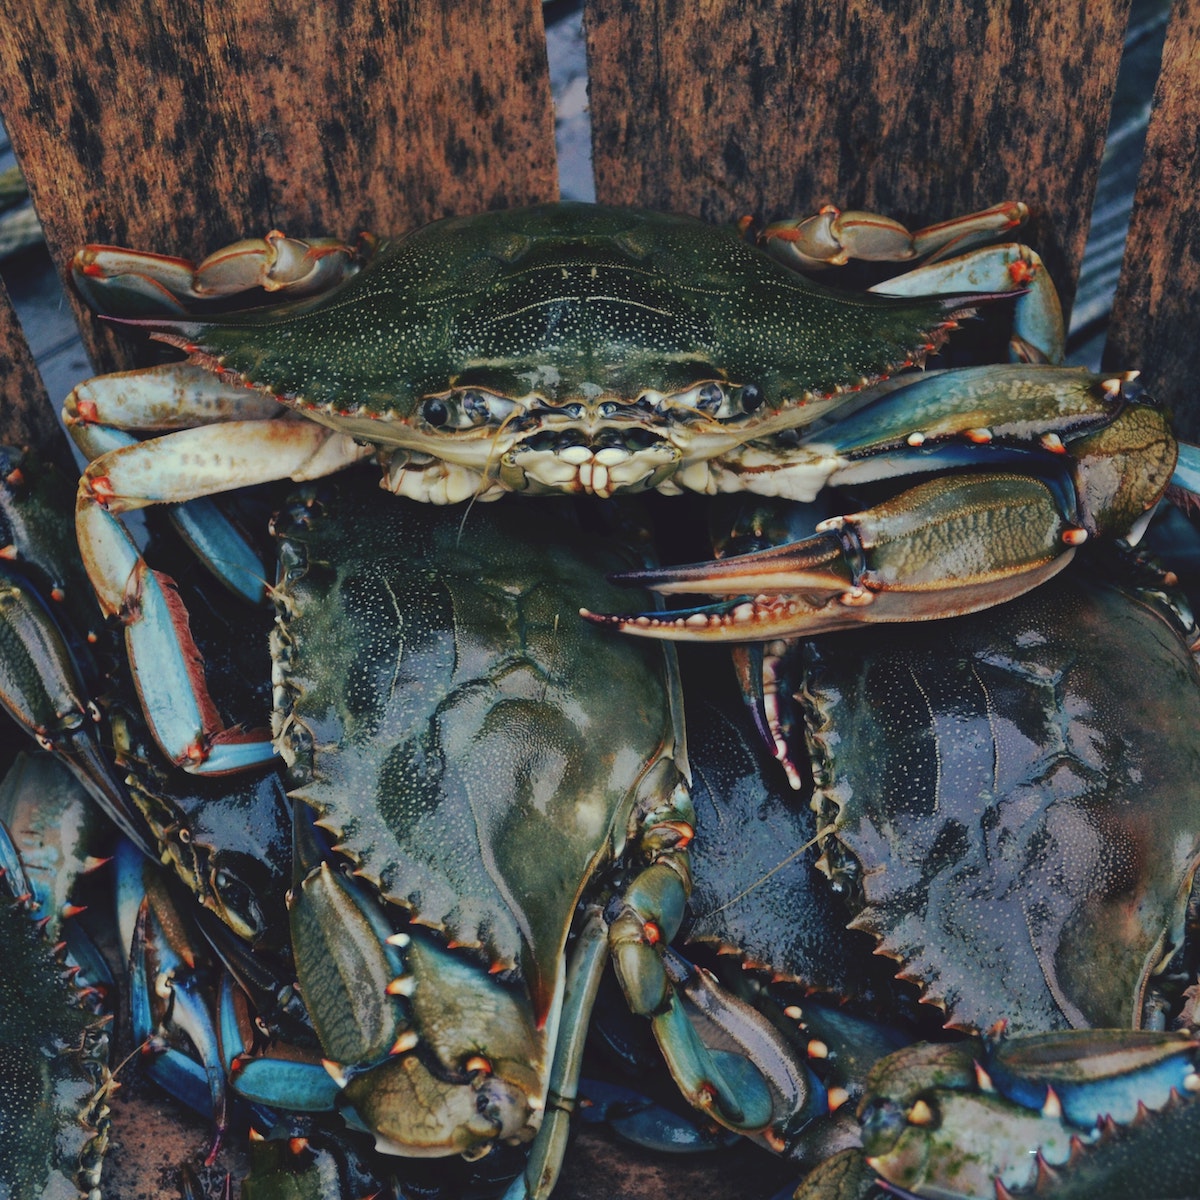 crabs on top of each other